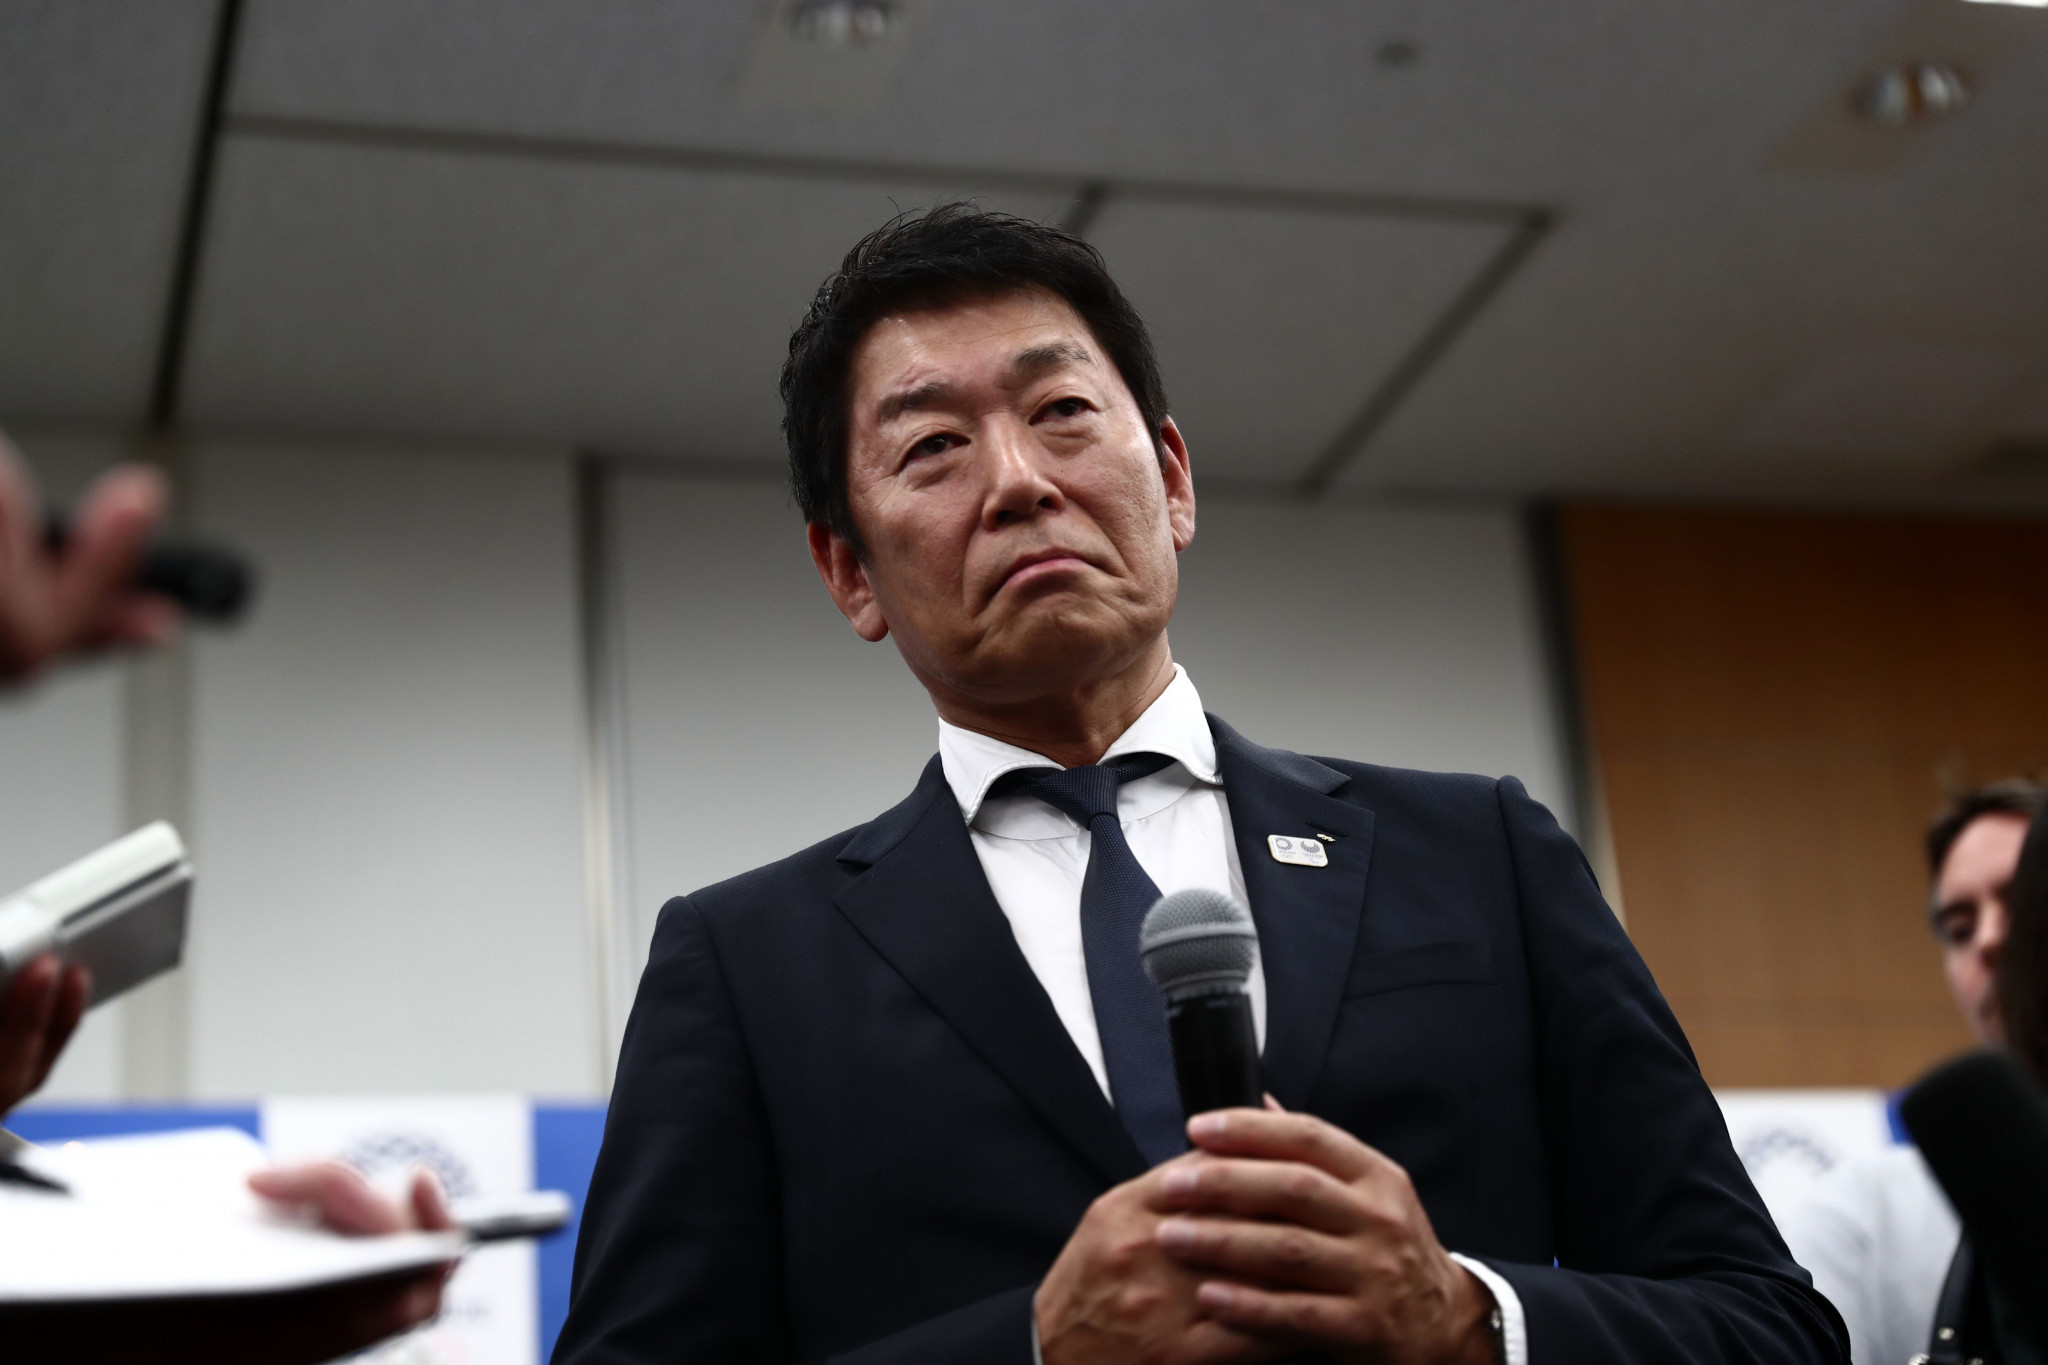 Morinari Watanabe is chairing an IOC taskforce responsible for overseeing the delivery of qualification events and the Tokyo 2020 Olympic boxing tournament ©Getty Images